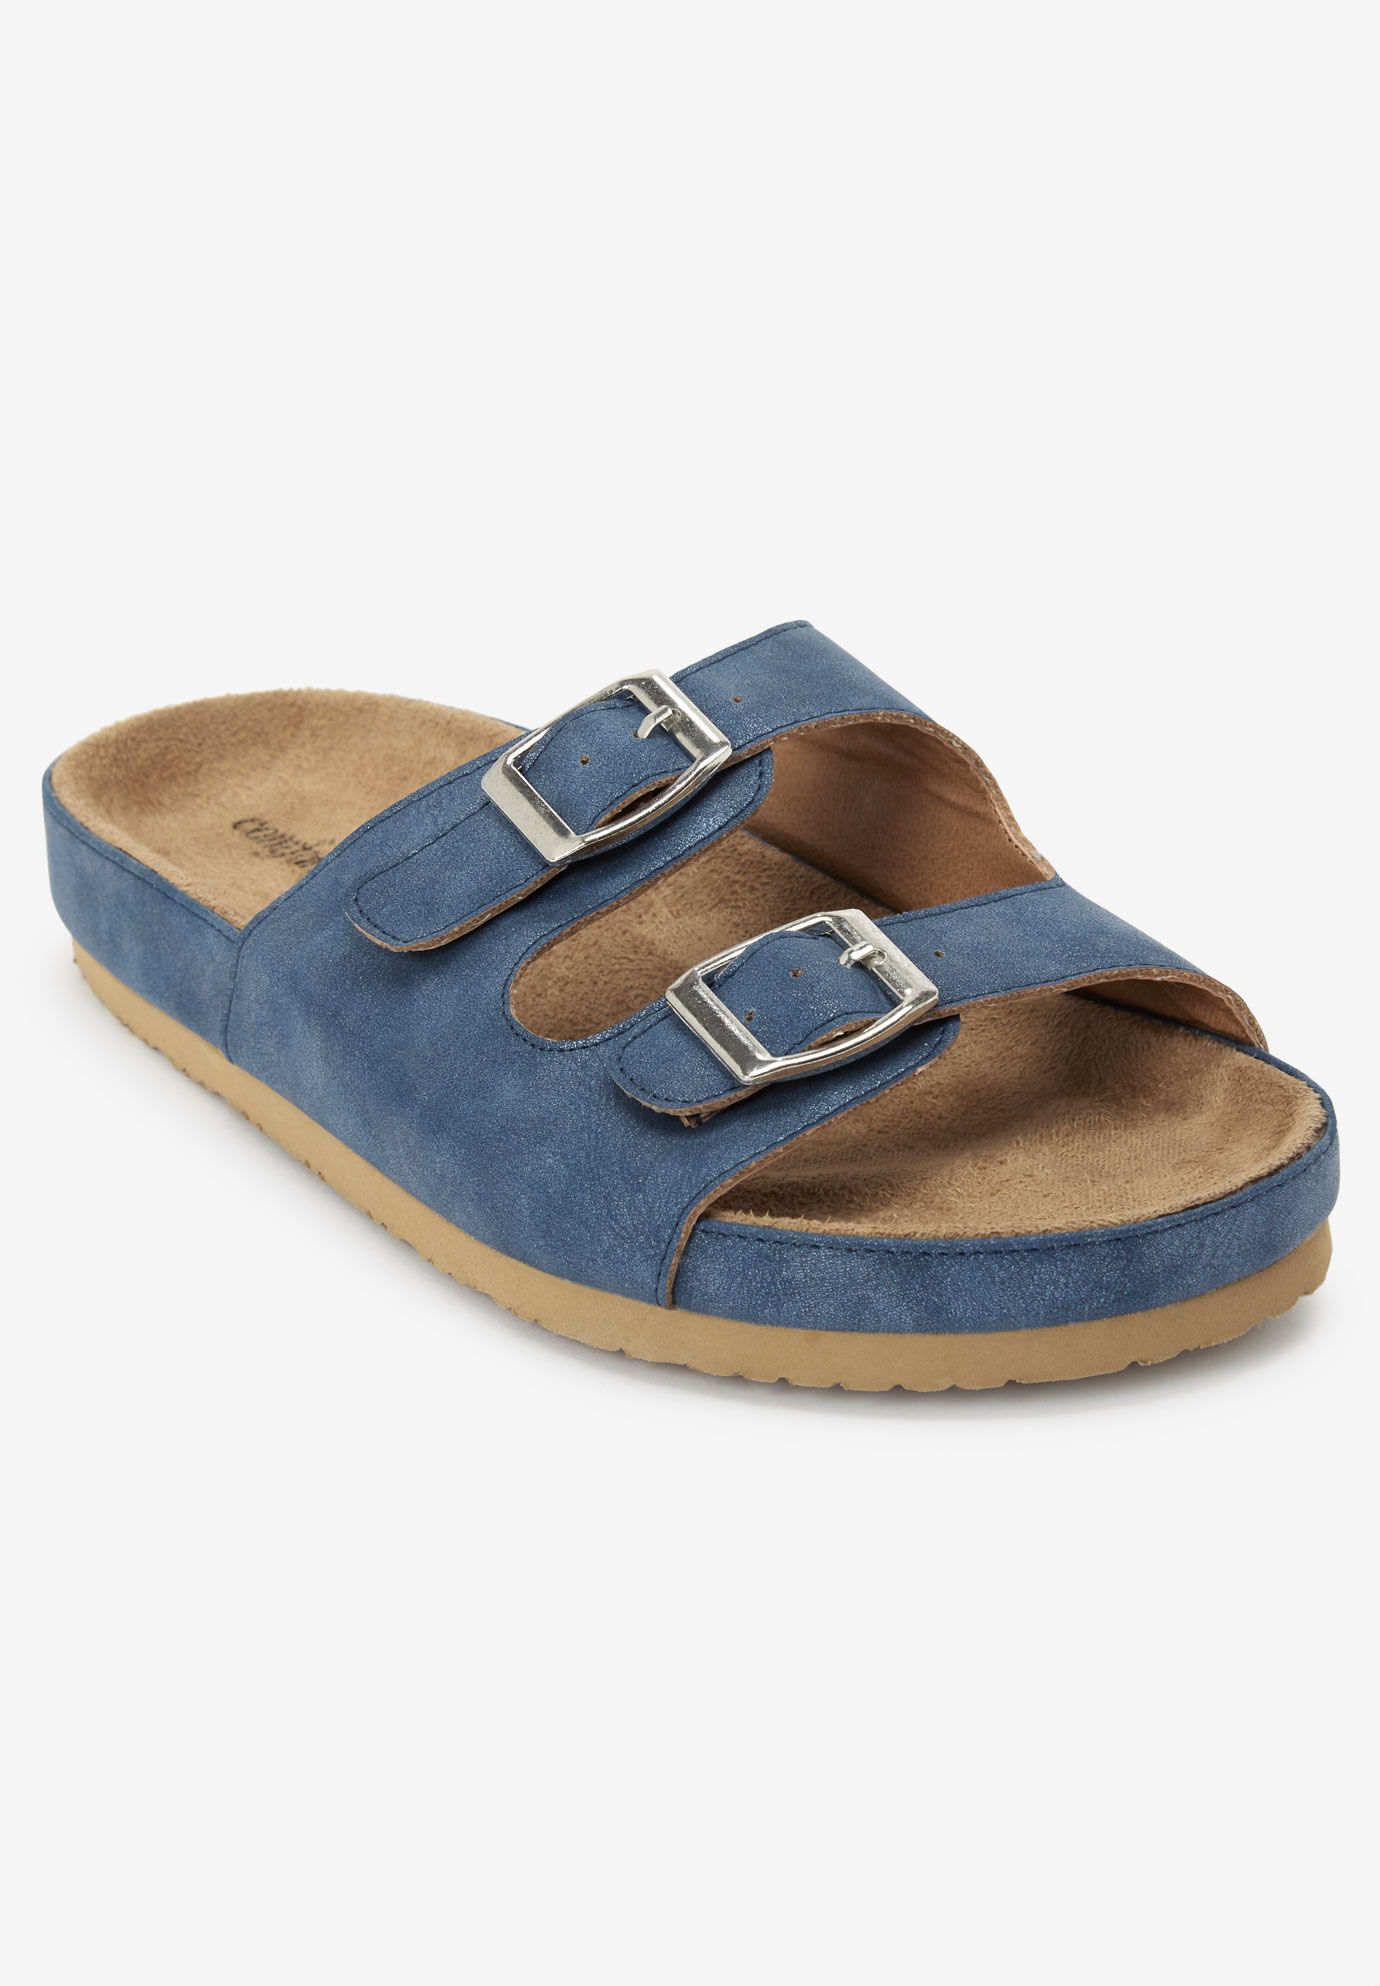 footbed sandals wide width